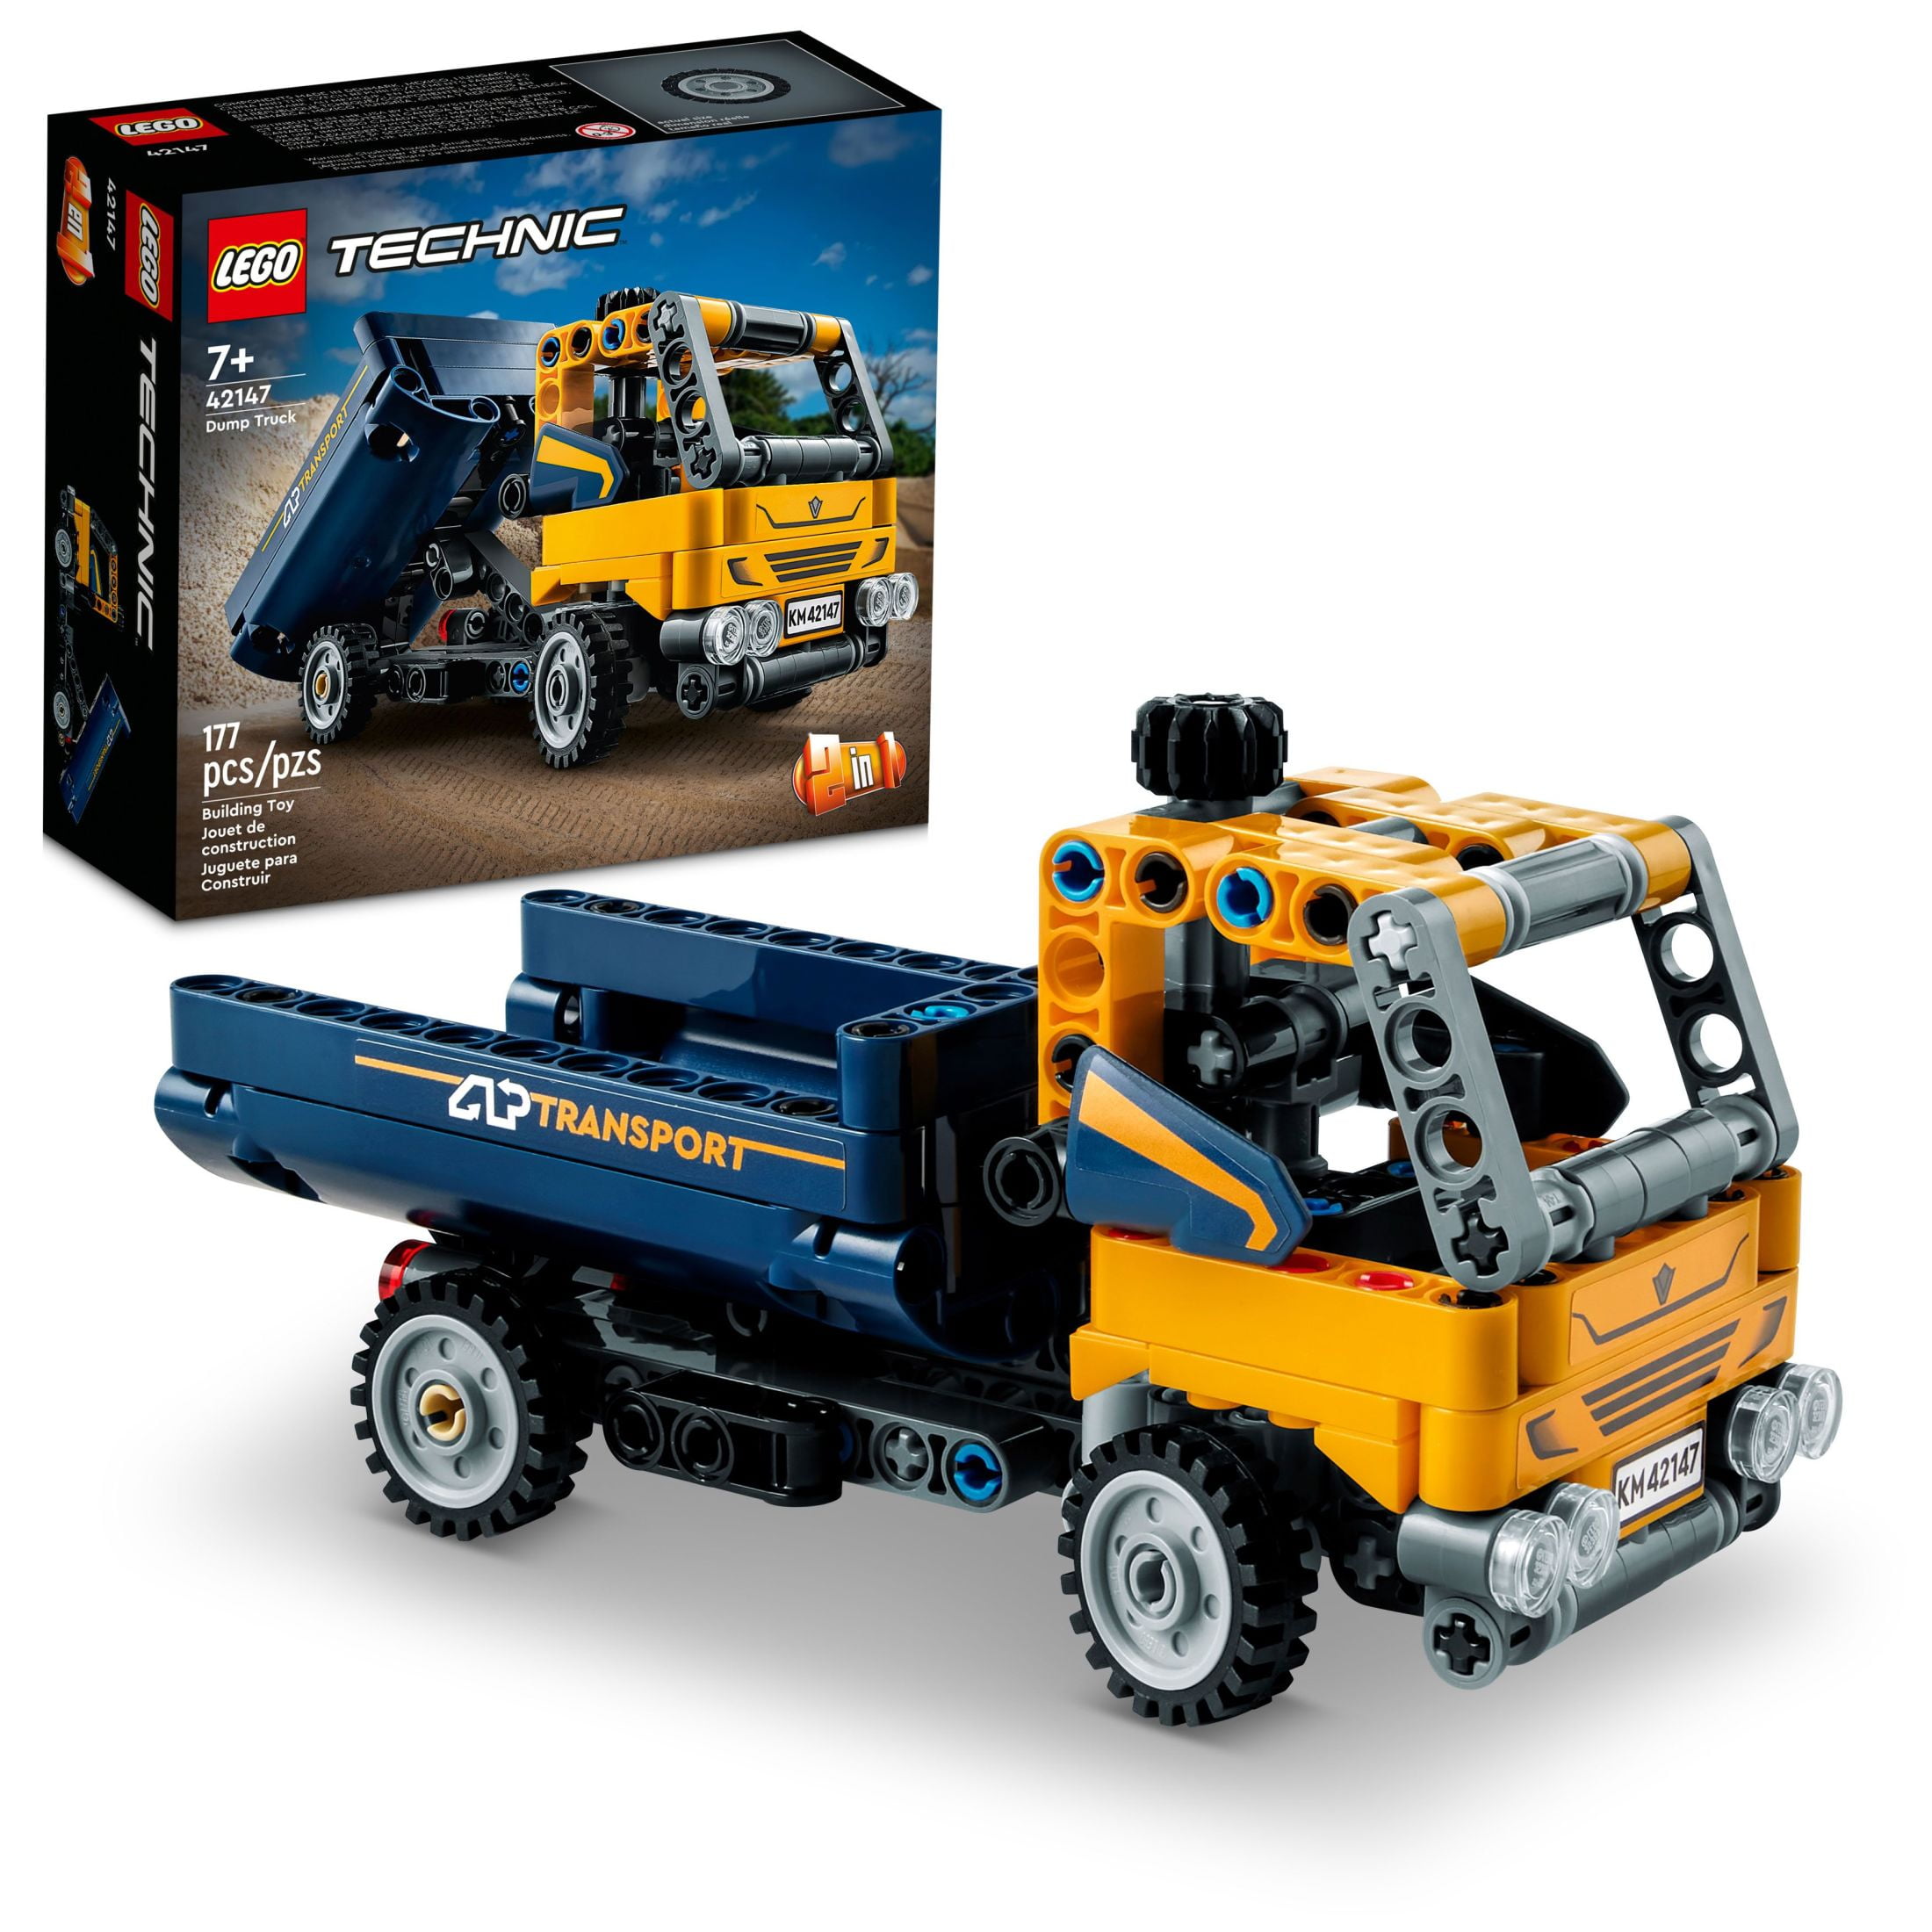 LEGO Technic Dump Truck 2in1 Toy Building Set, Model Construction Vehicle  and Excavator Digger Kit, Engineering Building Toys for Back to School,  Gift for Kids, Boys, Girls Ages 7+ Years Old, 42147 